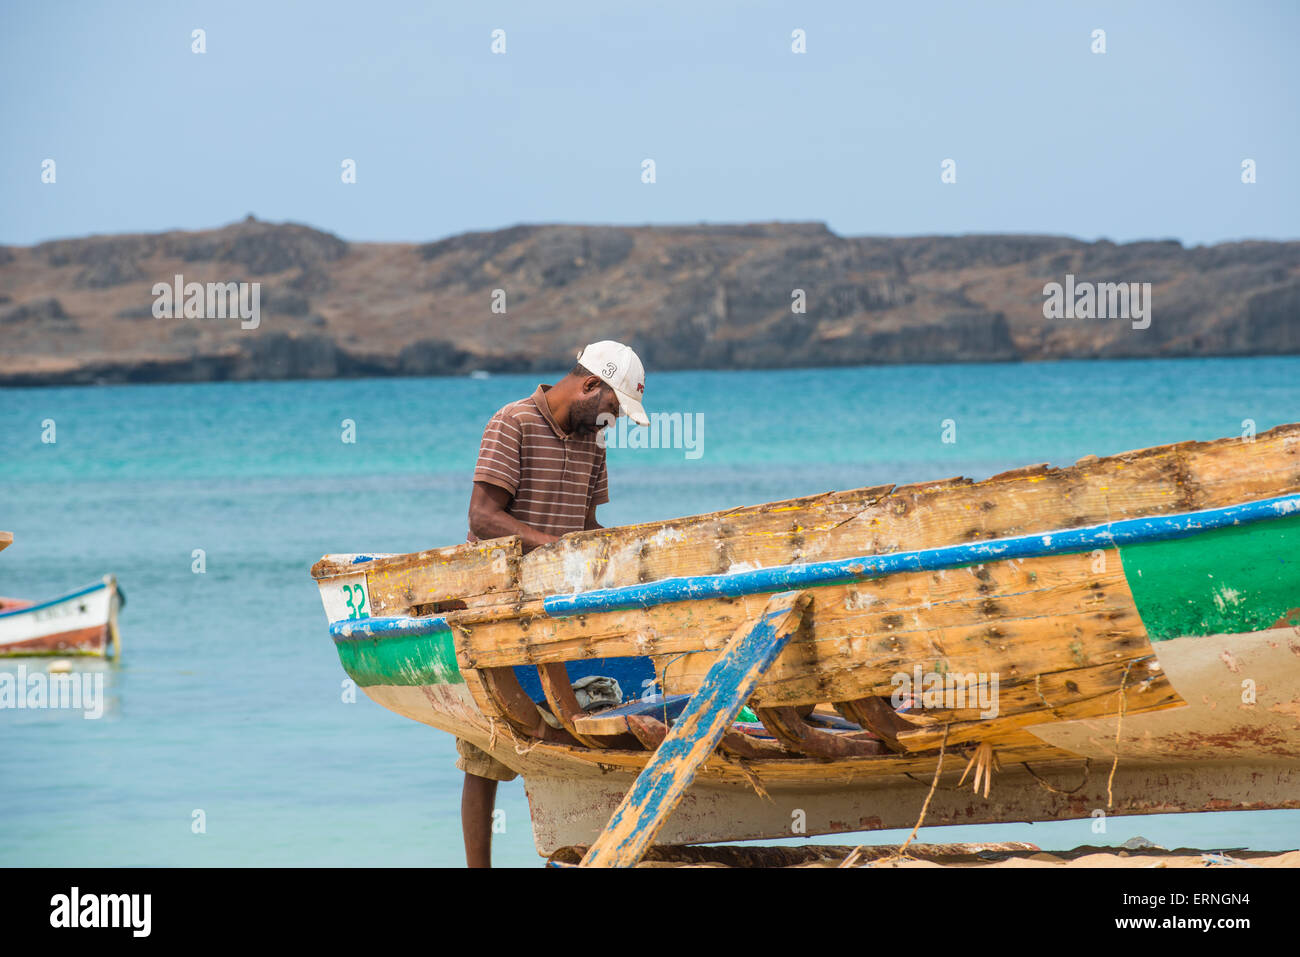 Local resident of Boa Vista working at his boat on the beach Stock Photo